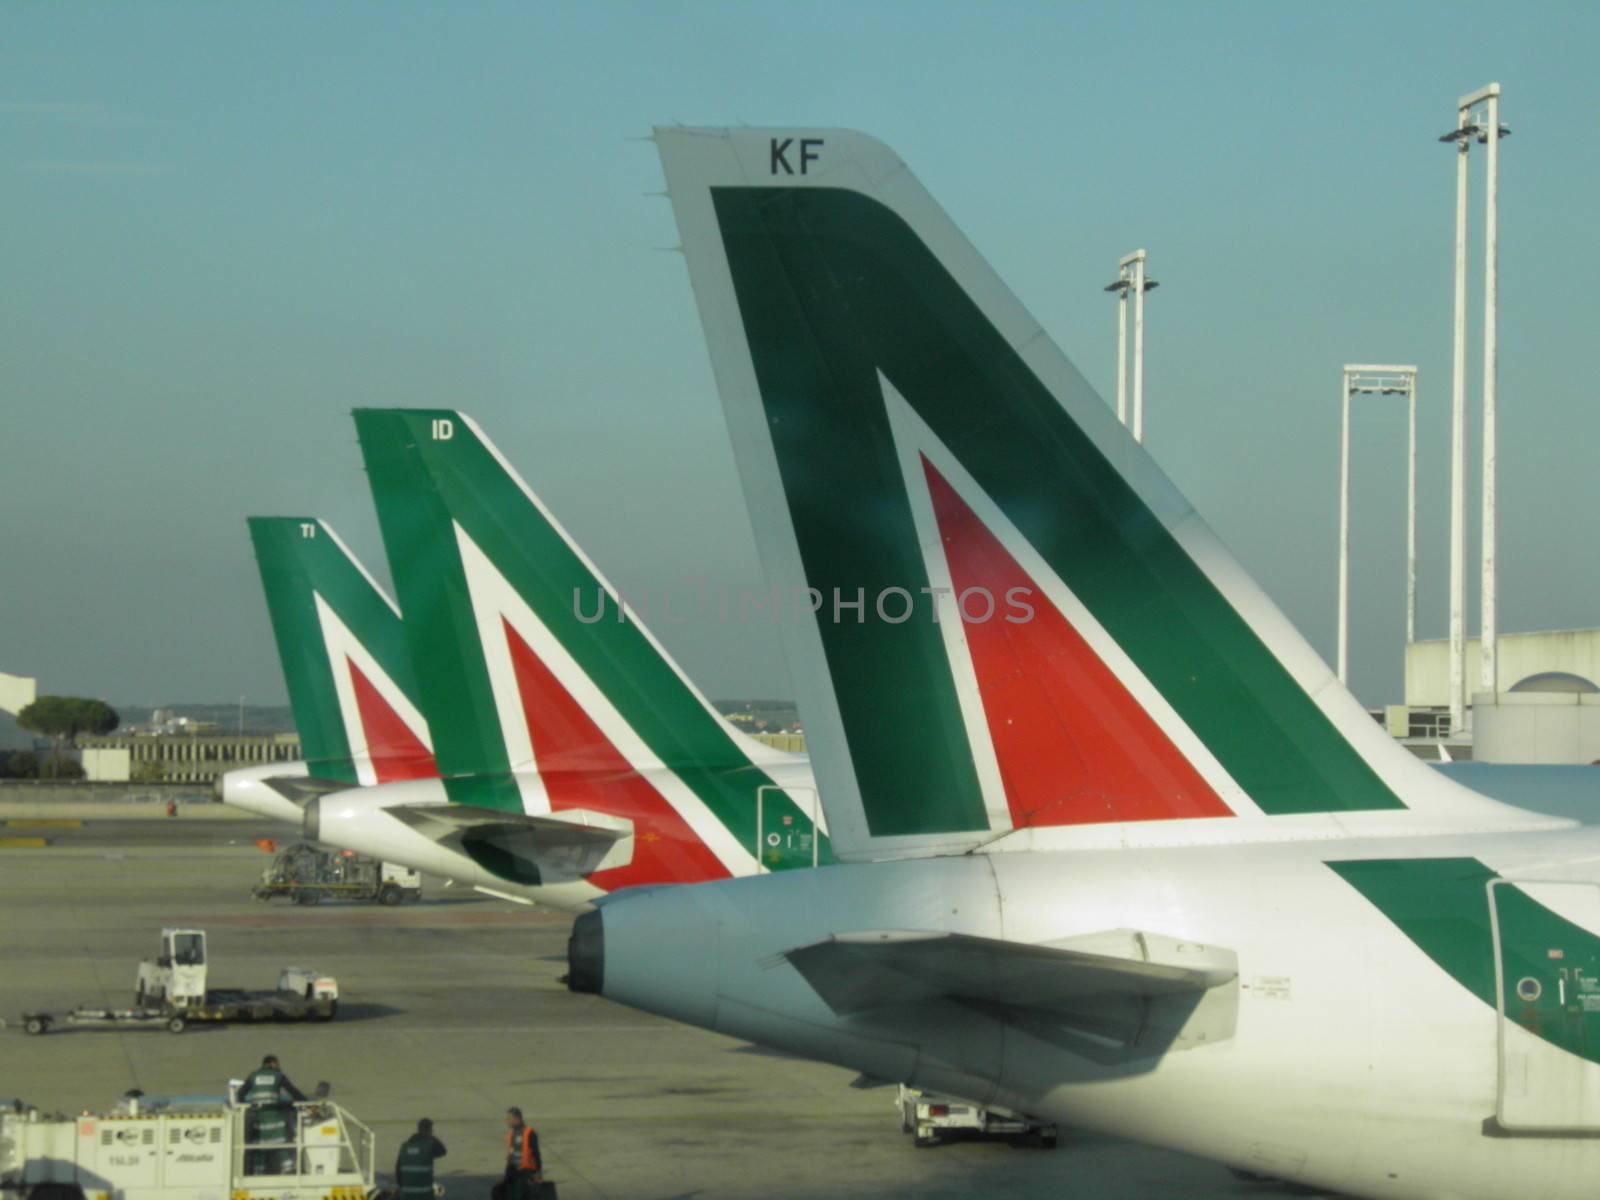 Alitalia airplanes by paolo77